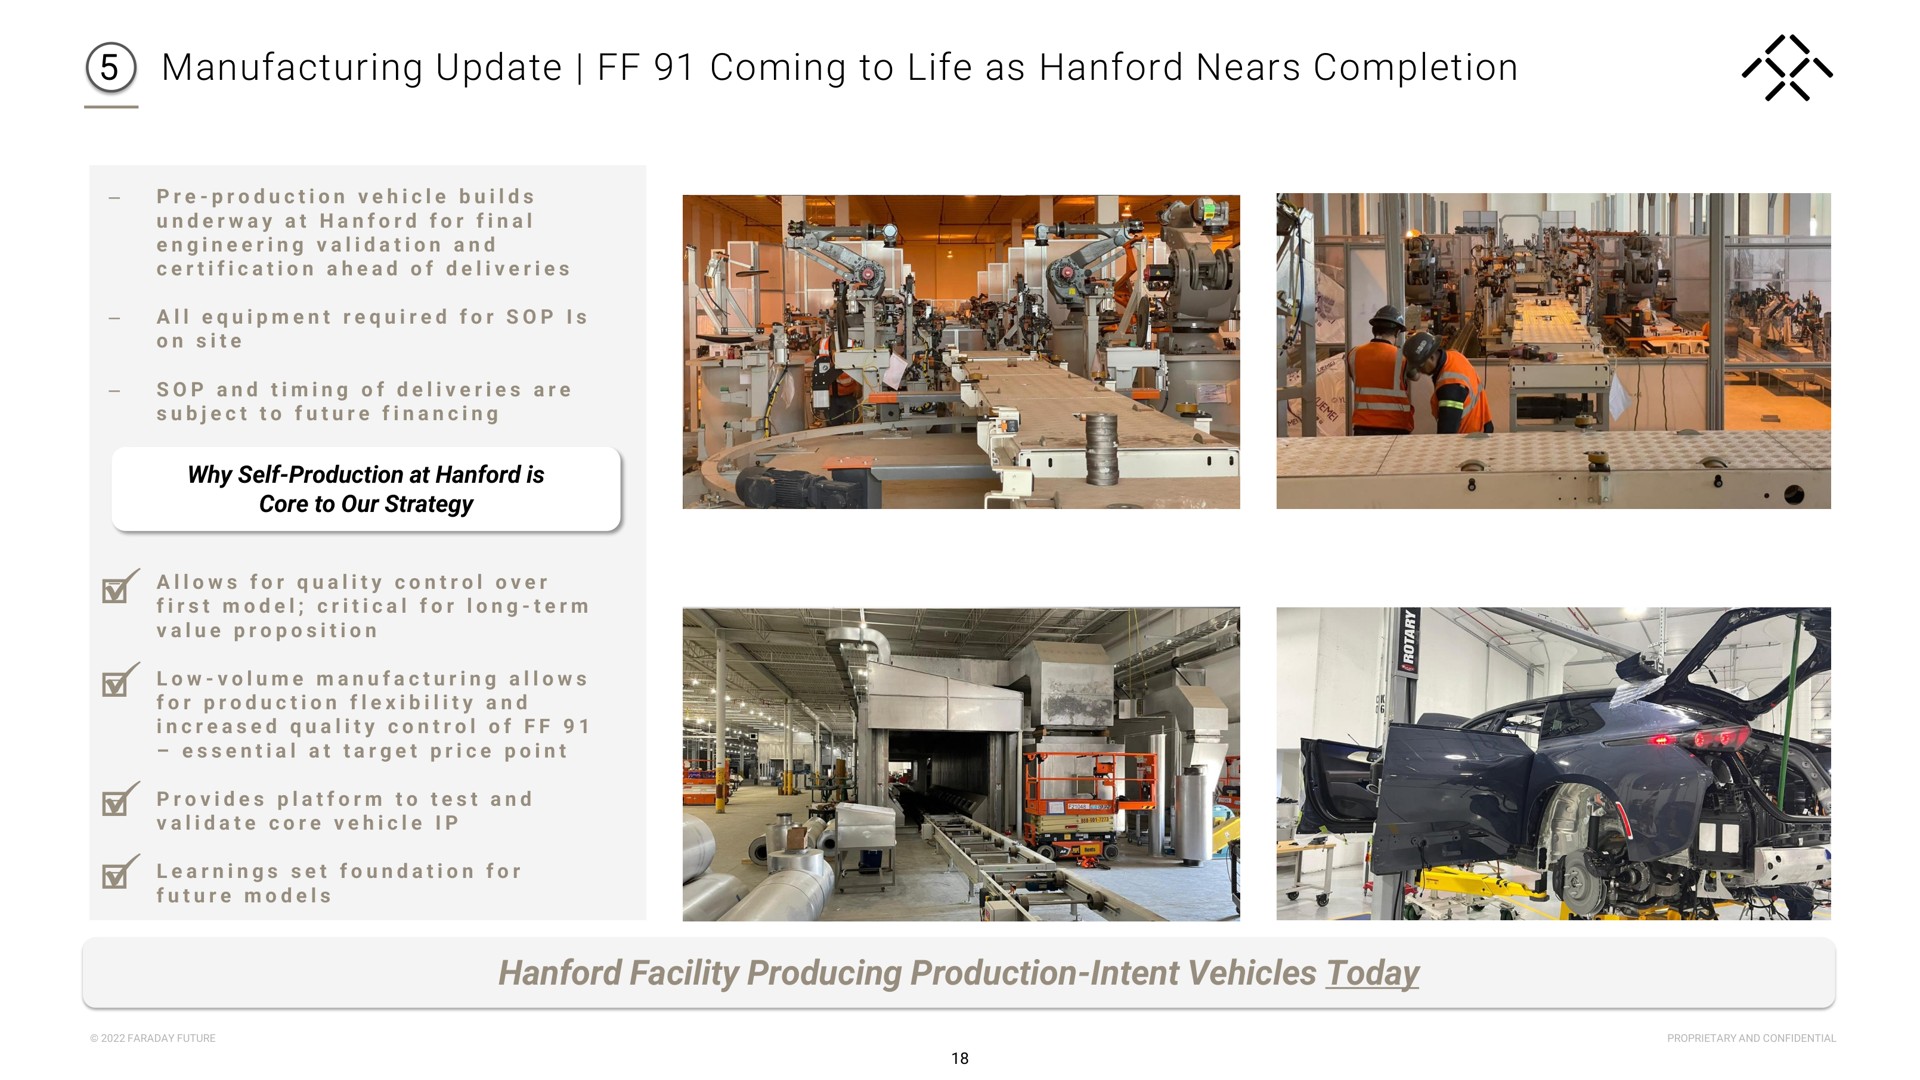 manufacturing update coming to life as nears completion facility producing production intent vehicles today | Faraday Future